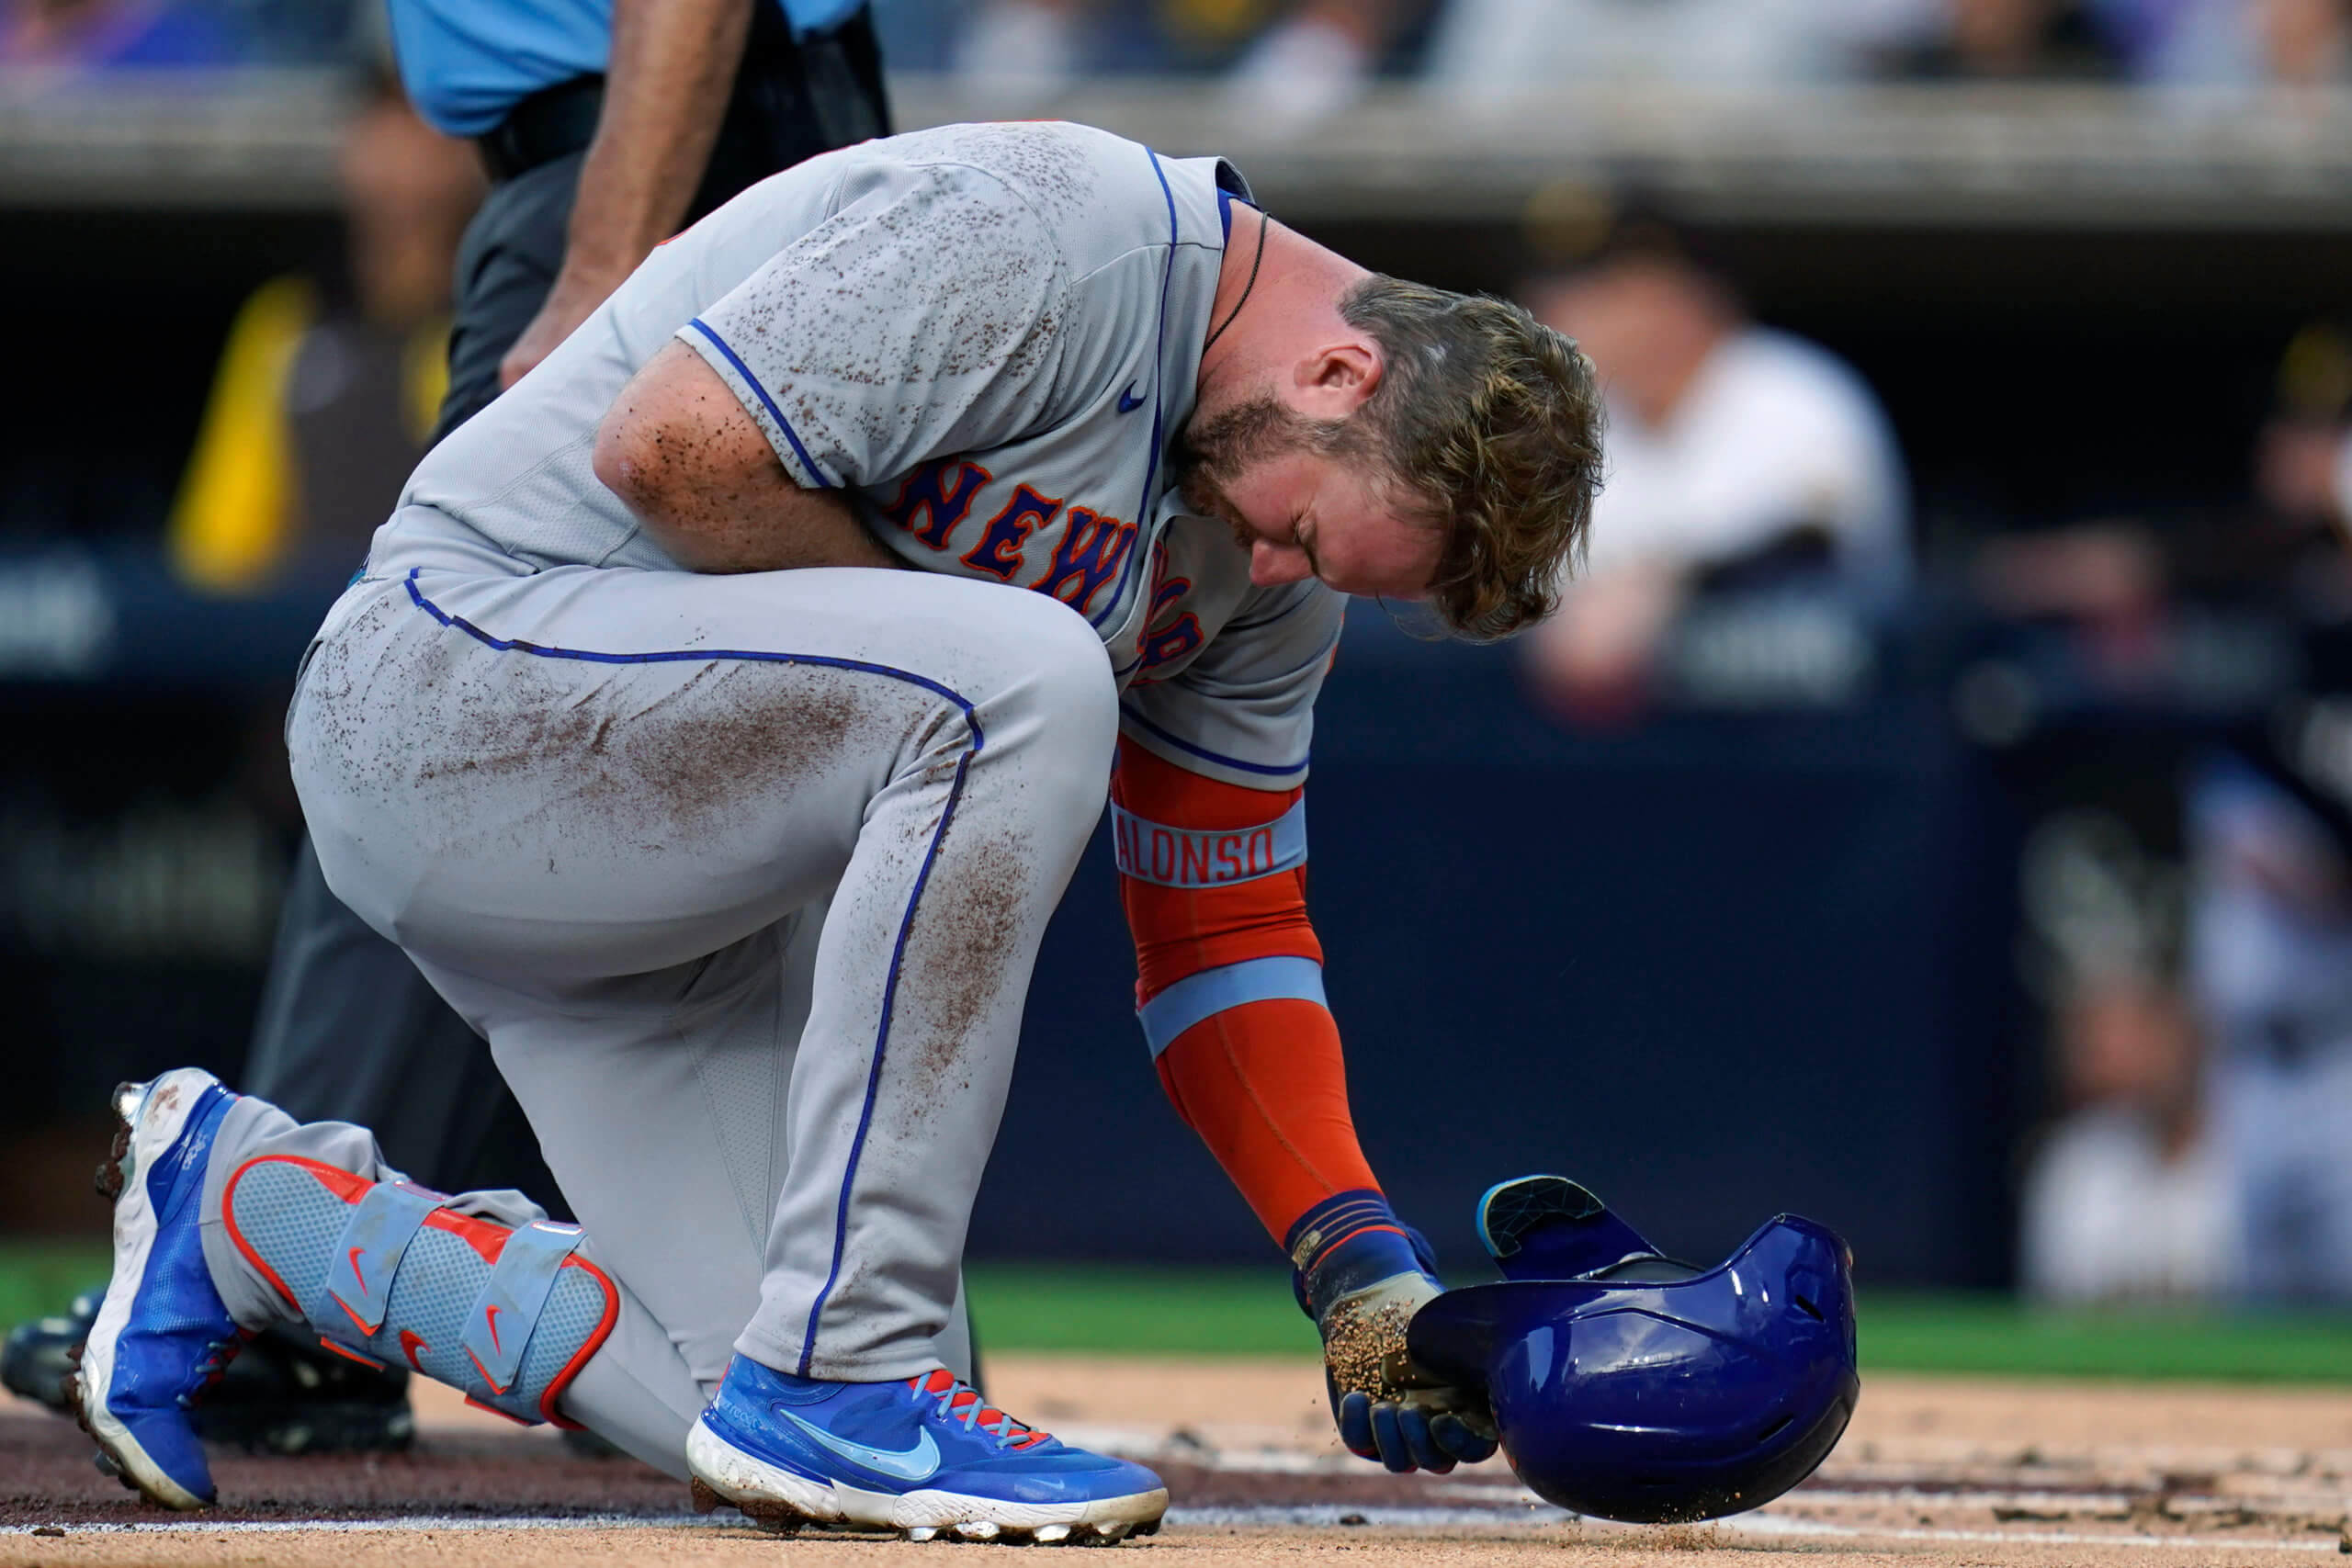 Mets place Starling Marte on 10-day IL with finger injury